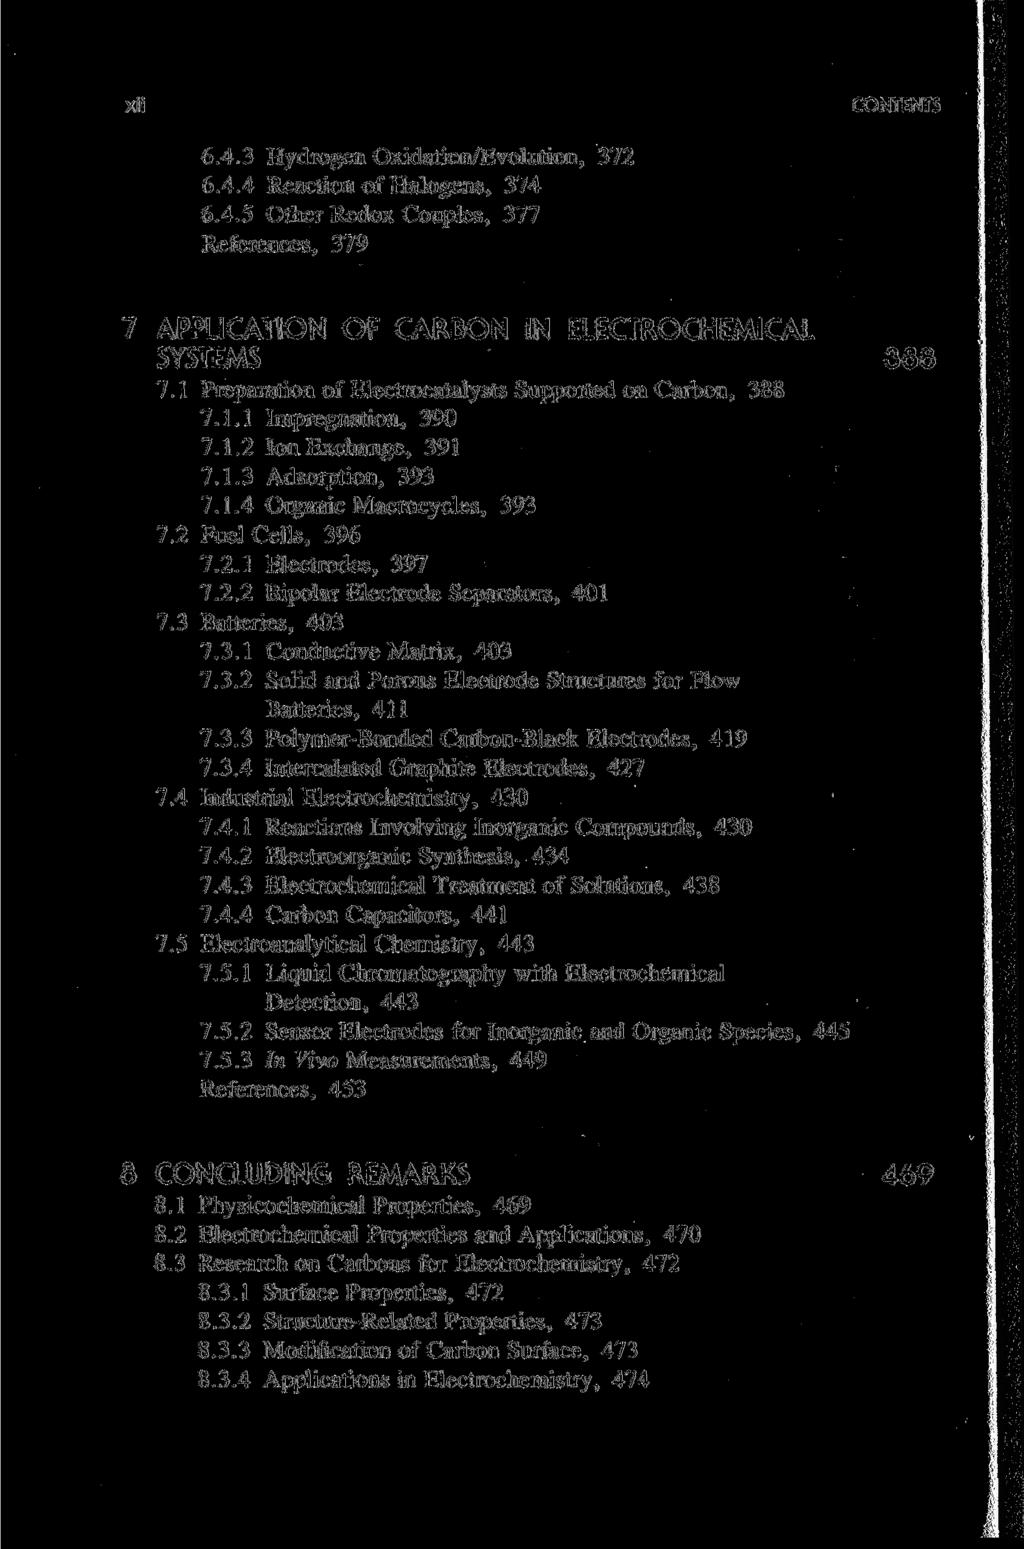 xii 6.4.3 Hydrogen Oxidation/Evolution, 372 6.4.4 Reaction of Halogens, 374 6.4.5 Other Redox Couples, 377 References, 379 7 APPLICATION OF CARDON IN ELECTROCHEMICAL SYSTEMS 386 7.